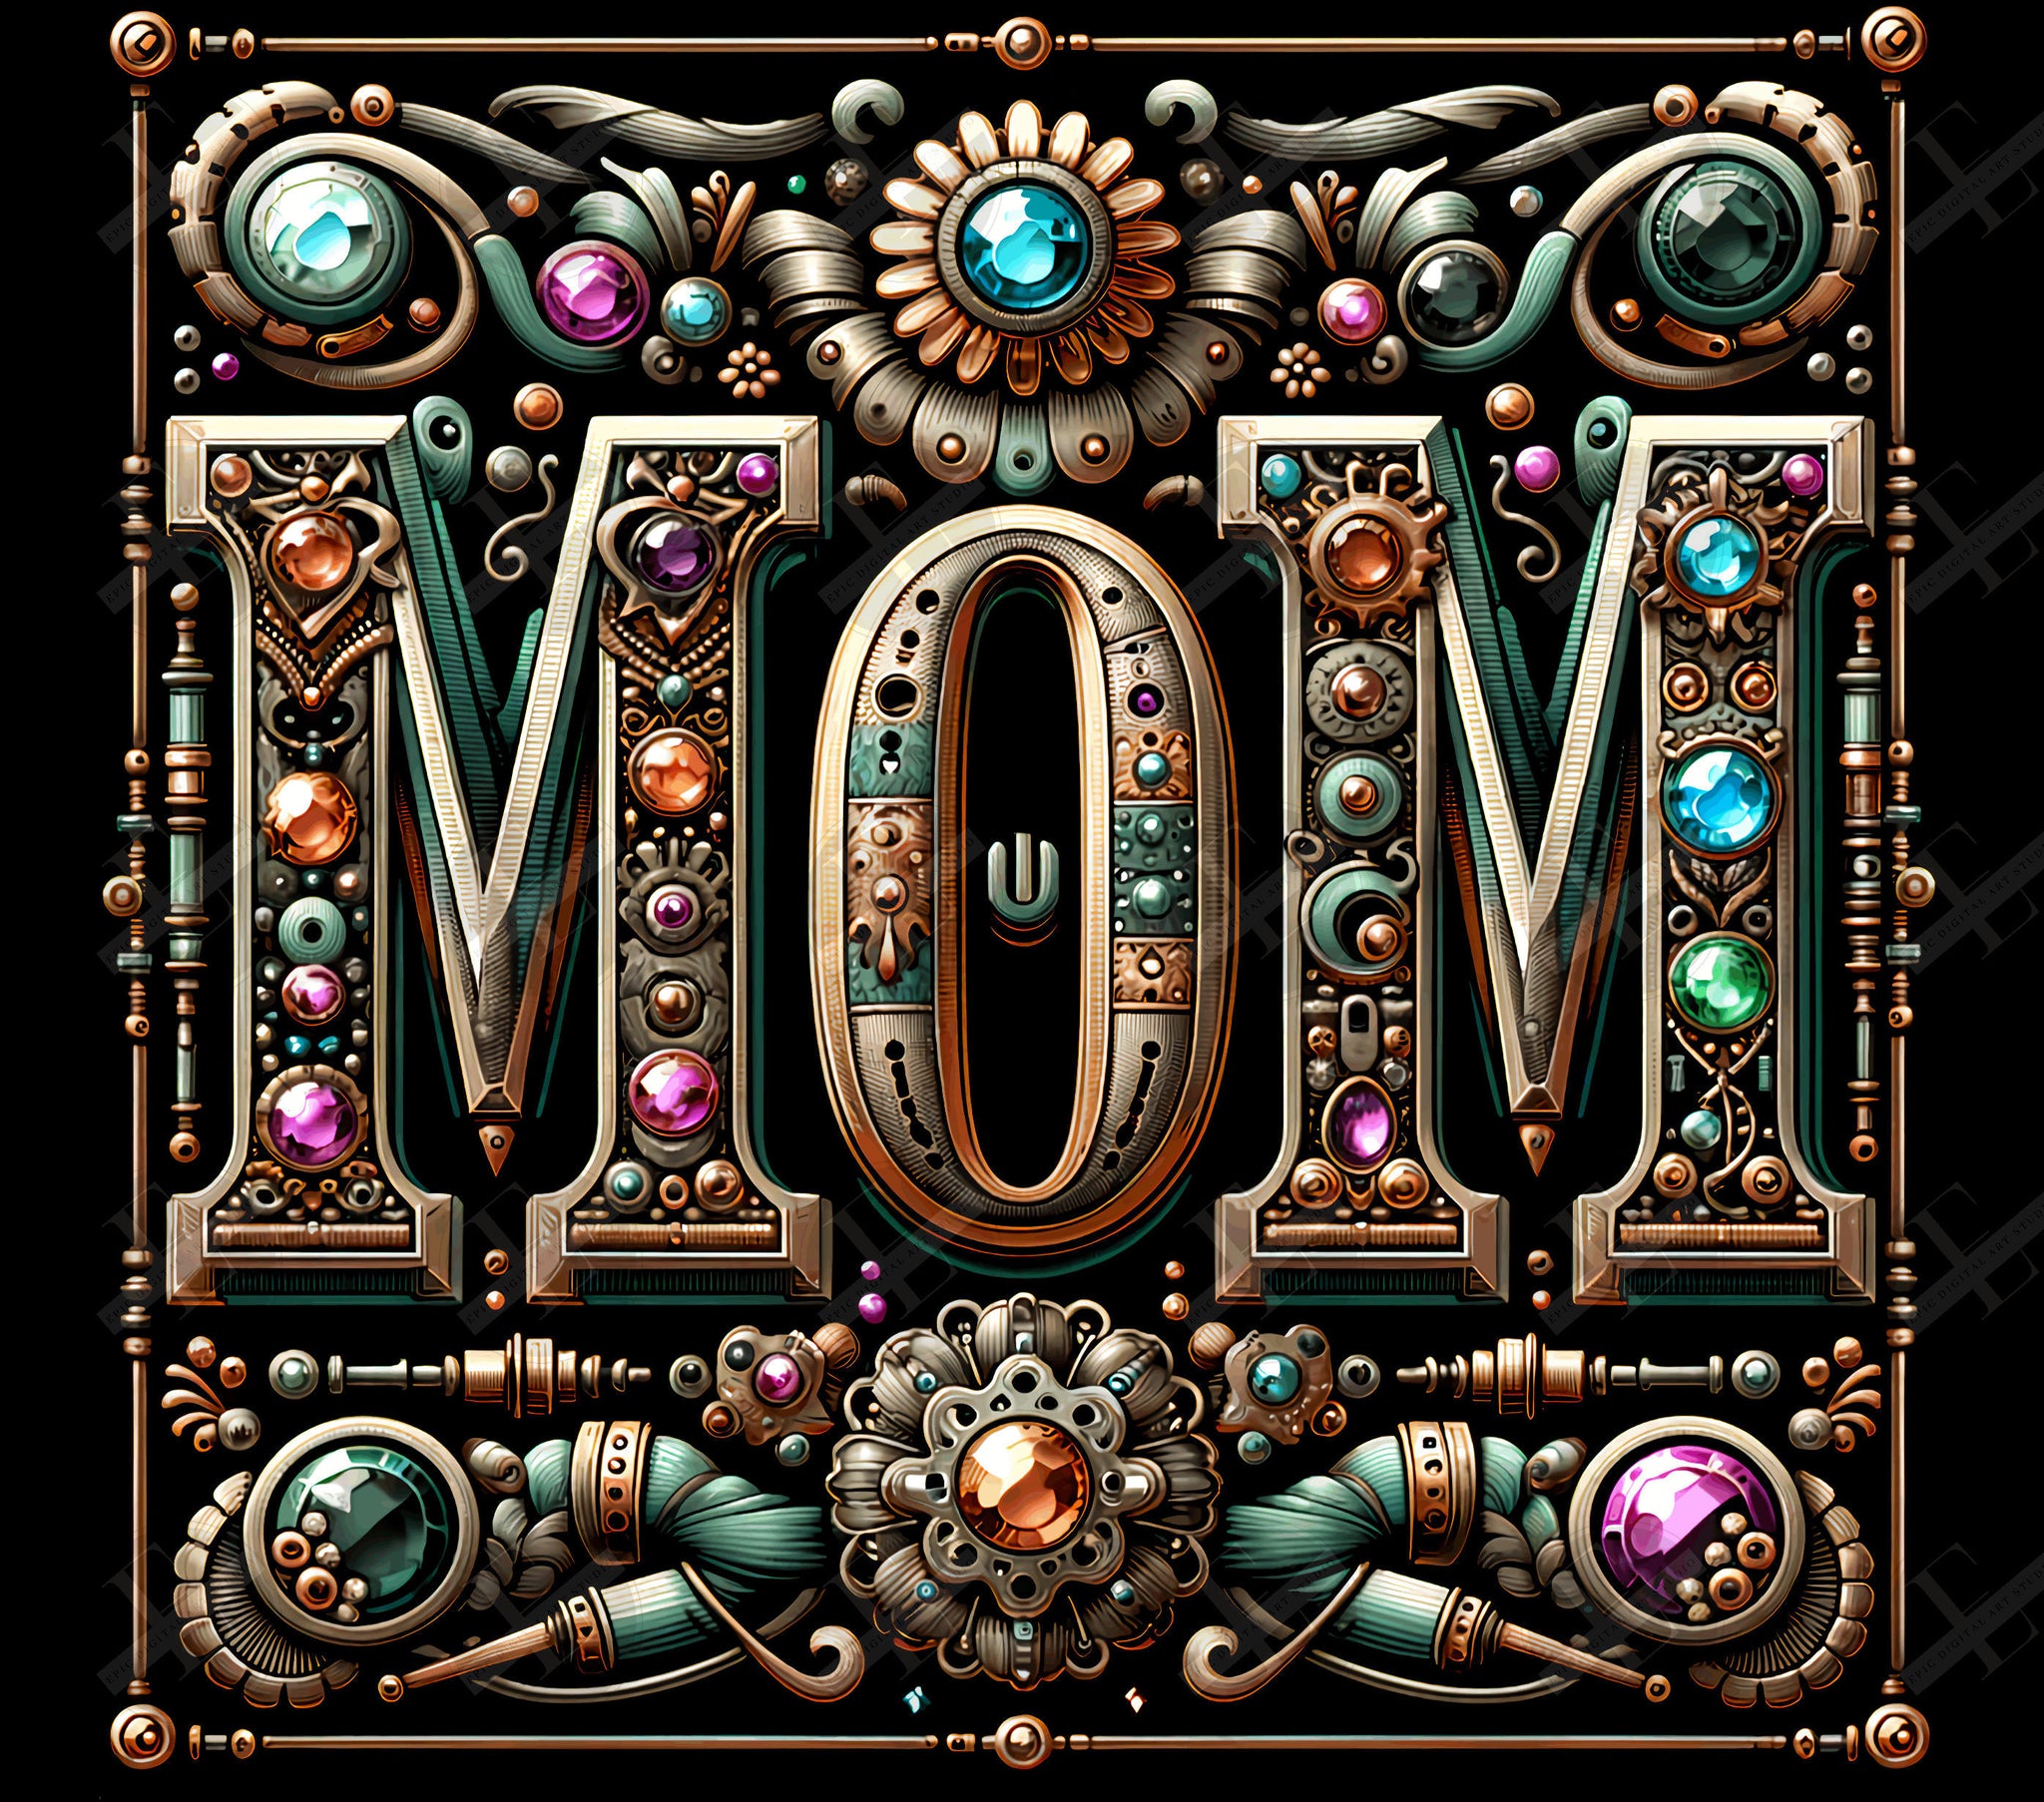 Mom Tumbler Wrap - Steampunk Family Tumbler Wraps - Tumbler Sublimation Designs Straight & Tapered - Instant Download